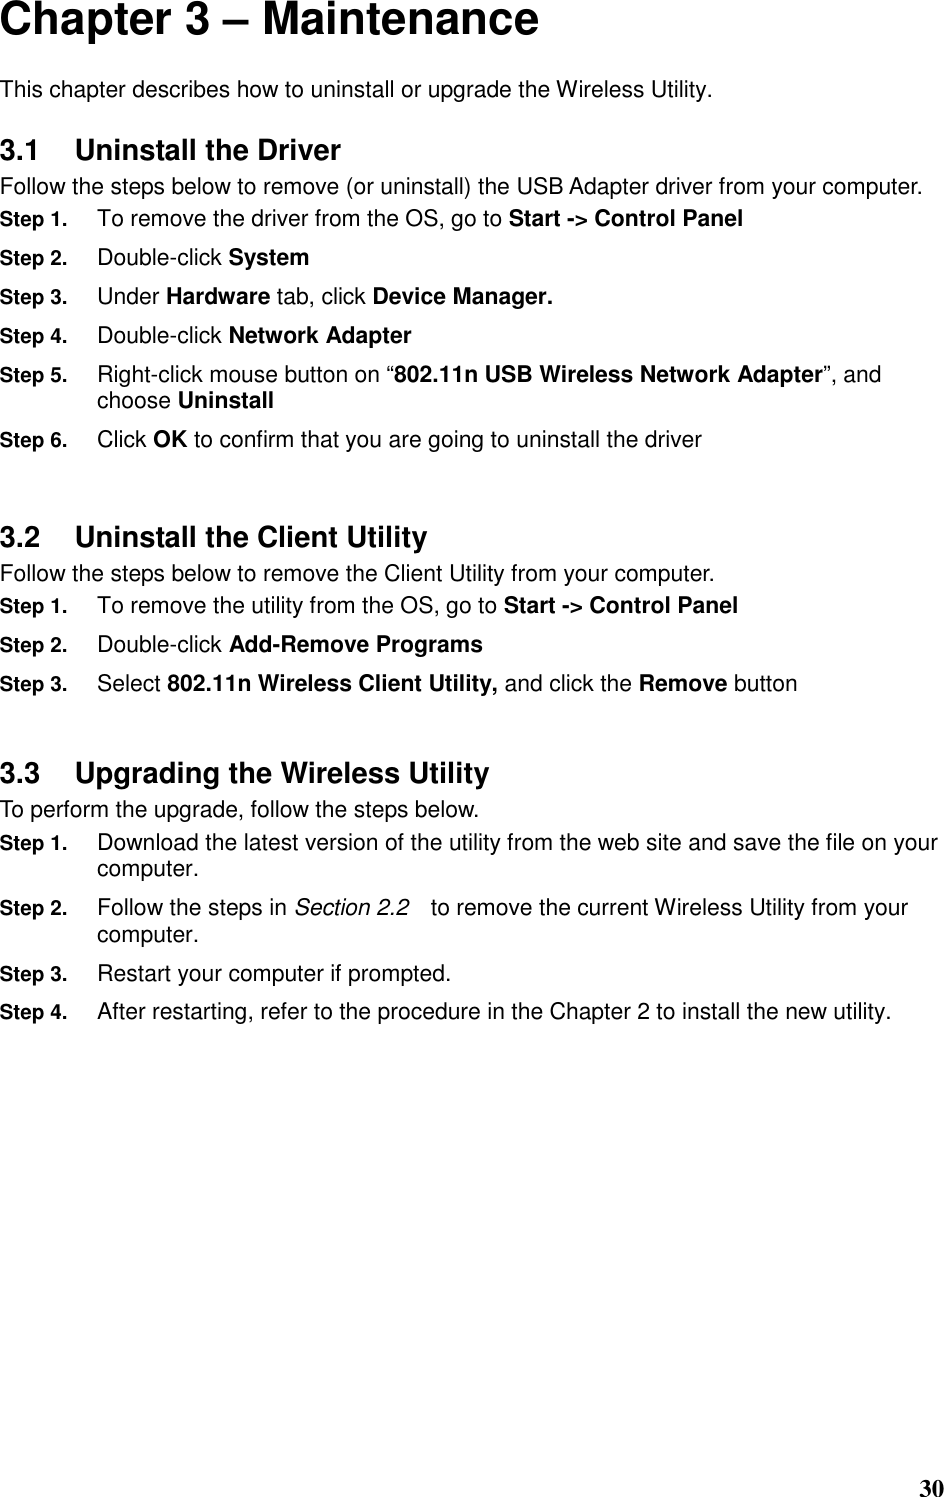  30 Chapter 3 – Maintenance This chapter describes how to uninstall or upgrade the Wireless Utility. 3.1  Uninstall the Driver Follow the steps below to remove (or uninstall) the USB Adapter driver from your computer.   Step 1. To remove the driver from the OS, go to Start -&gt; Control Panel Step 2. Double-click System Step 3. Under Hardware tab, click Device Manager.   Step 4. Double-click Network Adapter Step 5. Right-click mouse button on “802.11n USB Wireless Network Adapter”, and choose Uninstall Step 6. Click OK to confirm that you are going to uninstall the driver  3.2  Uninstall the Client Utility Follow the steps below to remove the Client Utility from your computer.   Step 1. To remove the utility from the OS, go to Start -&gt; Control Panel   Step 2. Double-click Add-Remove Programs Step 3. Select 802.11n Wireless Client Utility, and click the Remove button  3.3  Upgrading the Wireless Utility To perform the upgrade, follow the steps below. Step 1. Download the latest version of the utility from the web site and save the file on your computer. Step 2. Follow the steps in Section 2.2    to remove the current Wireless Utility from your computer.   Step 3. Restart your computer if prompted. Step 4. After restarting, refer to the procedure in the Chapter 2 to install the new utility.       